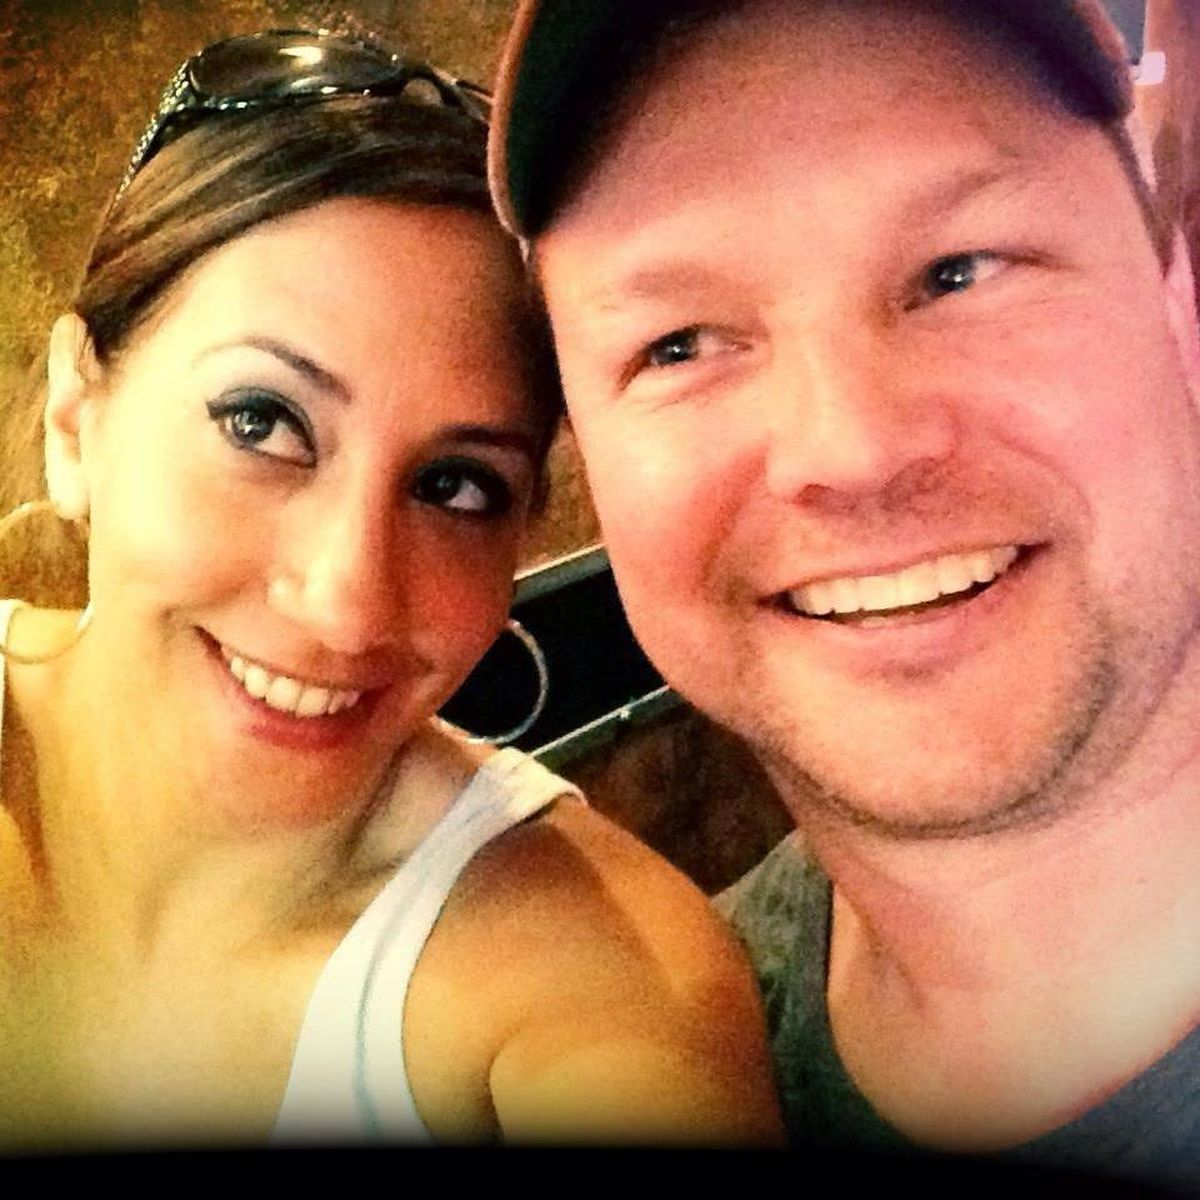 The first-degree manslaughter trial against Dwayne  Thurman, right, begins this week  in Spokane County Superior Court. Thurman, 44, was charged last year with killing his wife, Brenda Thurman, left, on Jan. 18, 2016, in their Spokane Valley home. Dwayne Thurman told investigators the shooting was an accident. (Courtesy of the family Brenda Thurman)